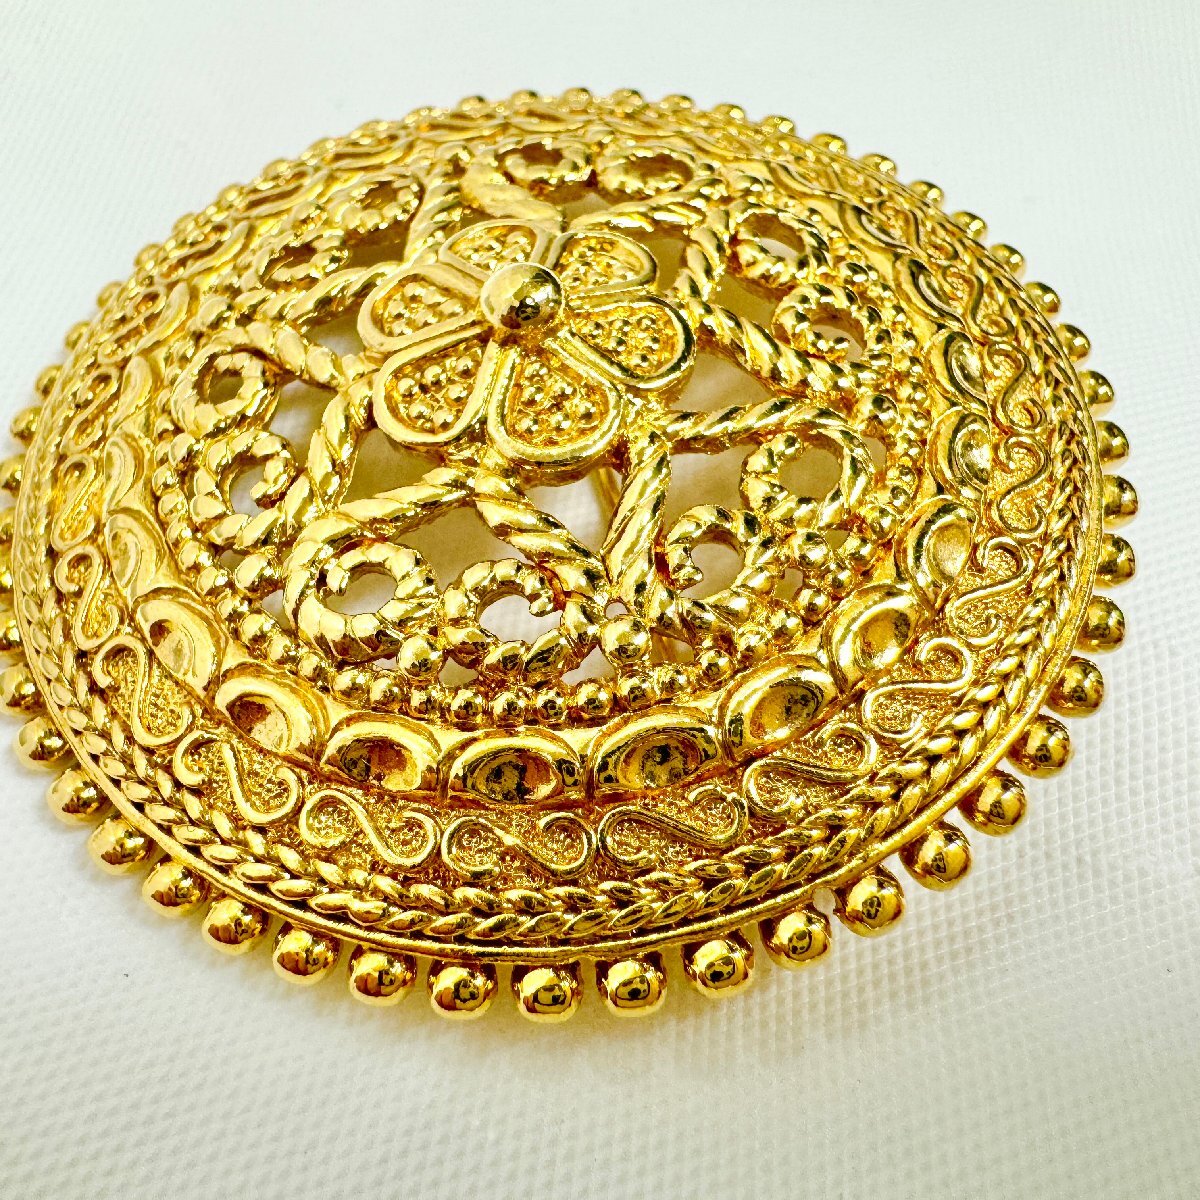  gold gram [27]Christian Dior Christian Dior brooch * case attaching *[ free shipping ]